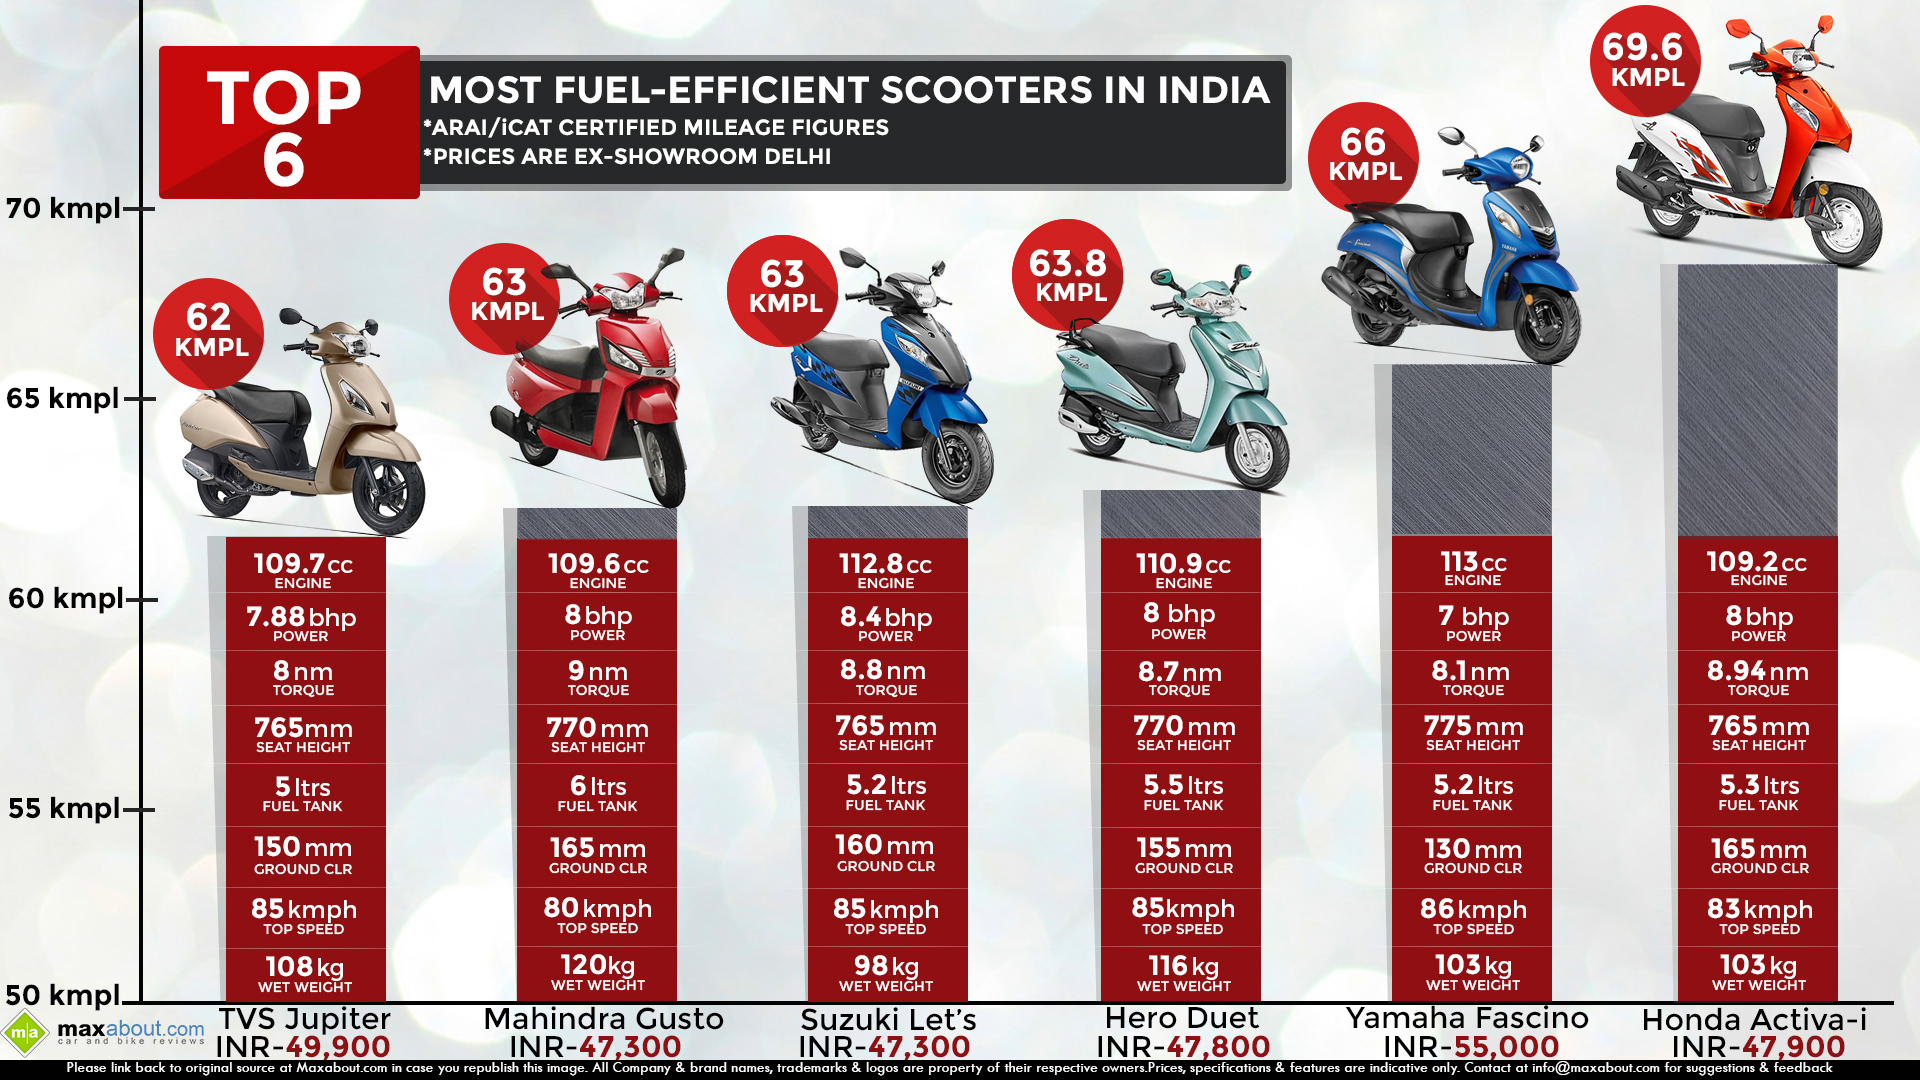 Top 6 Most FuelEfficient Scooters in India Mileage Figures are ARAI